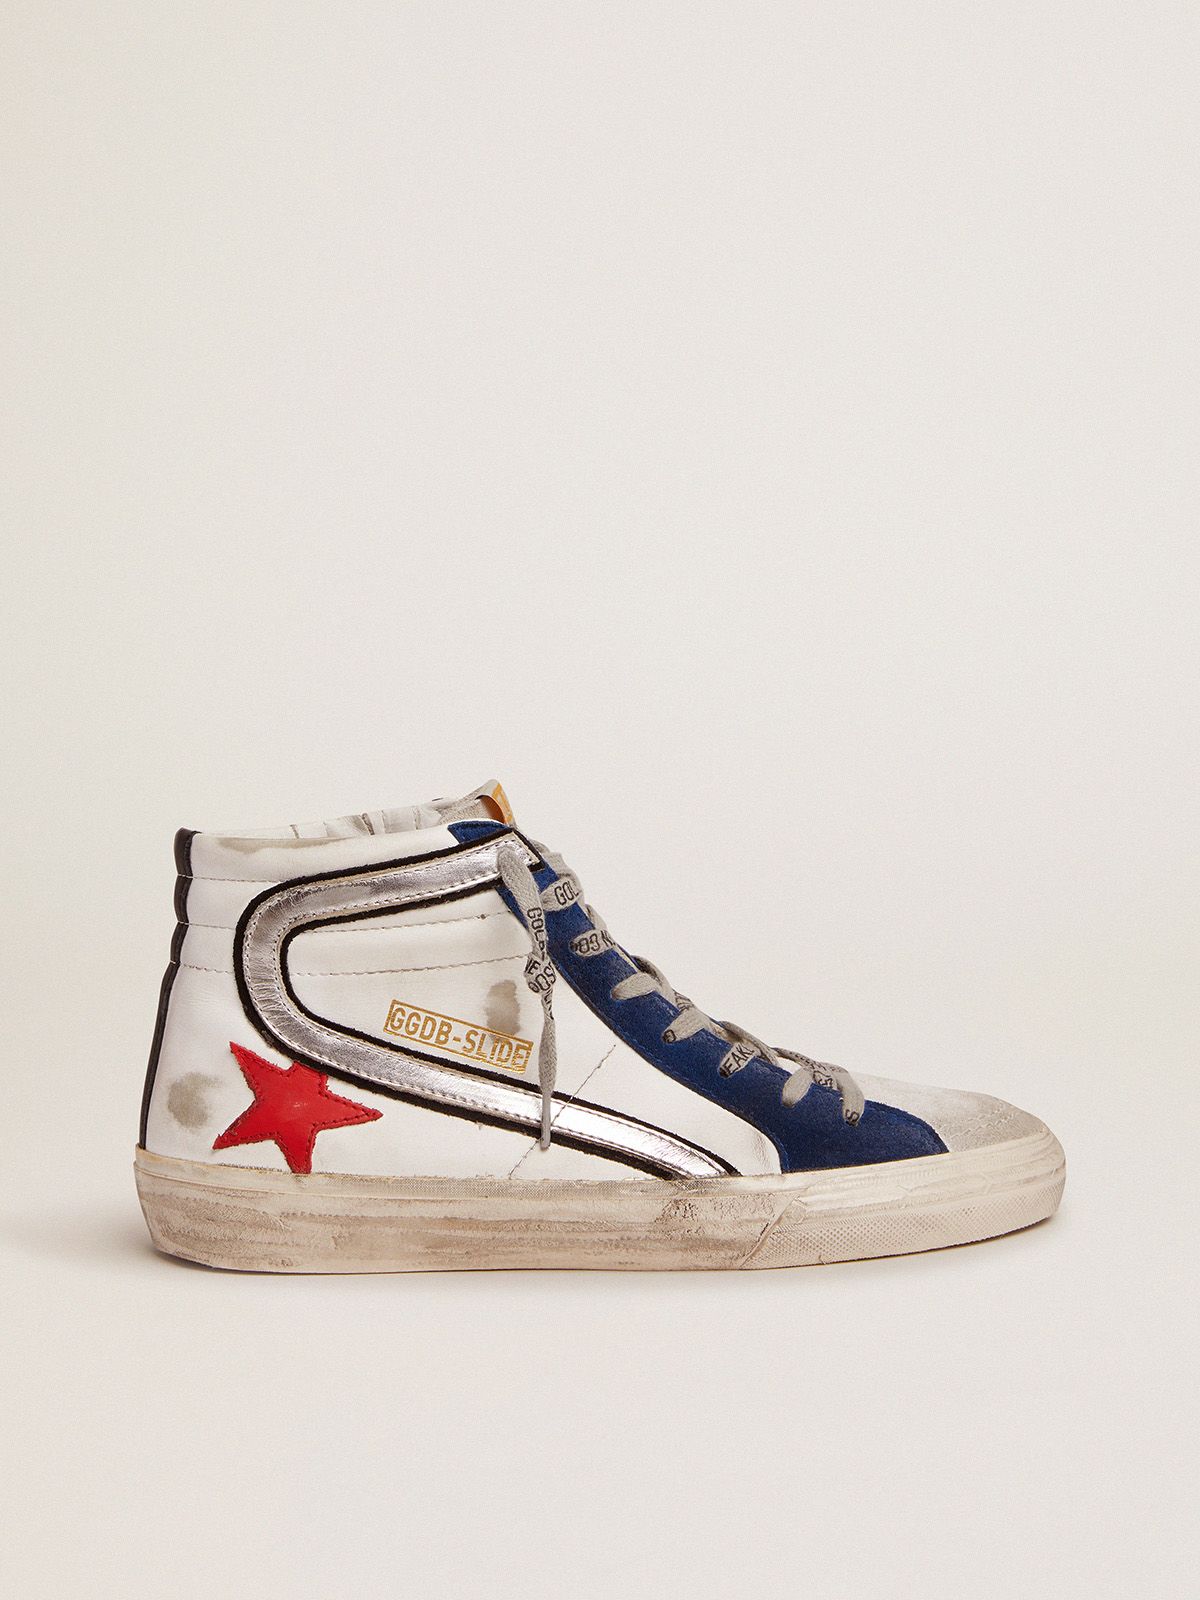 Golden Goose Donna Sneakers Slide sneakers in white leather with red leather star